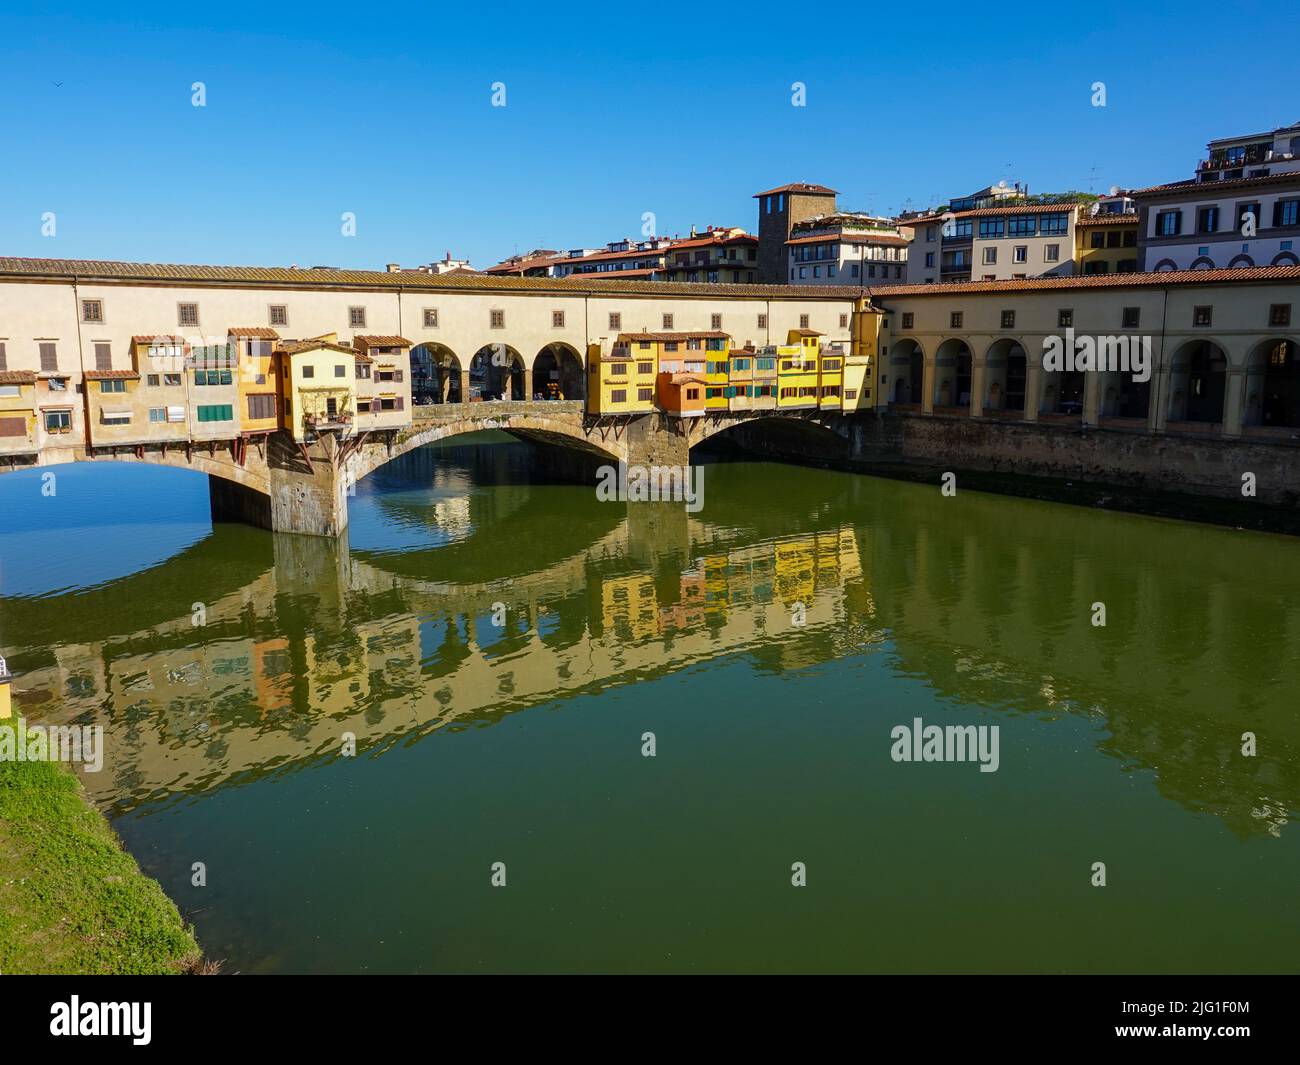 Ponte Vecchio bridge, crossing the Arno River on a sunny day in April, Florence, Tuscany, Italy. Stock Photo